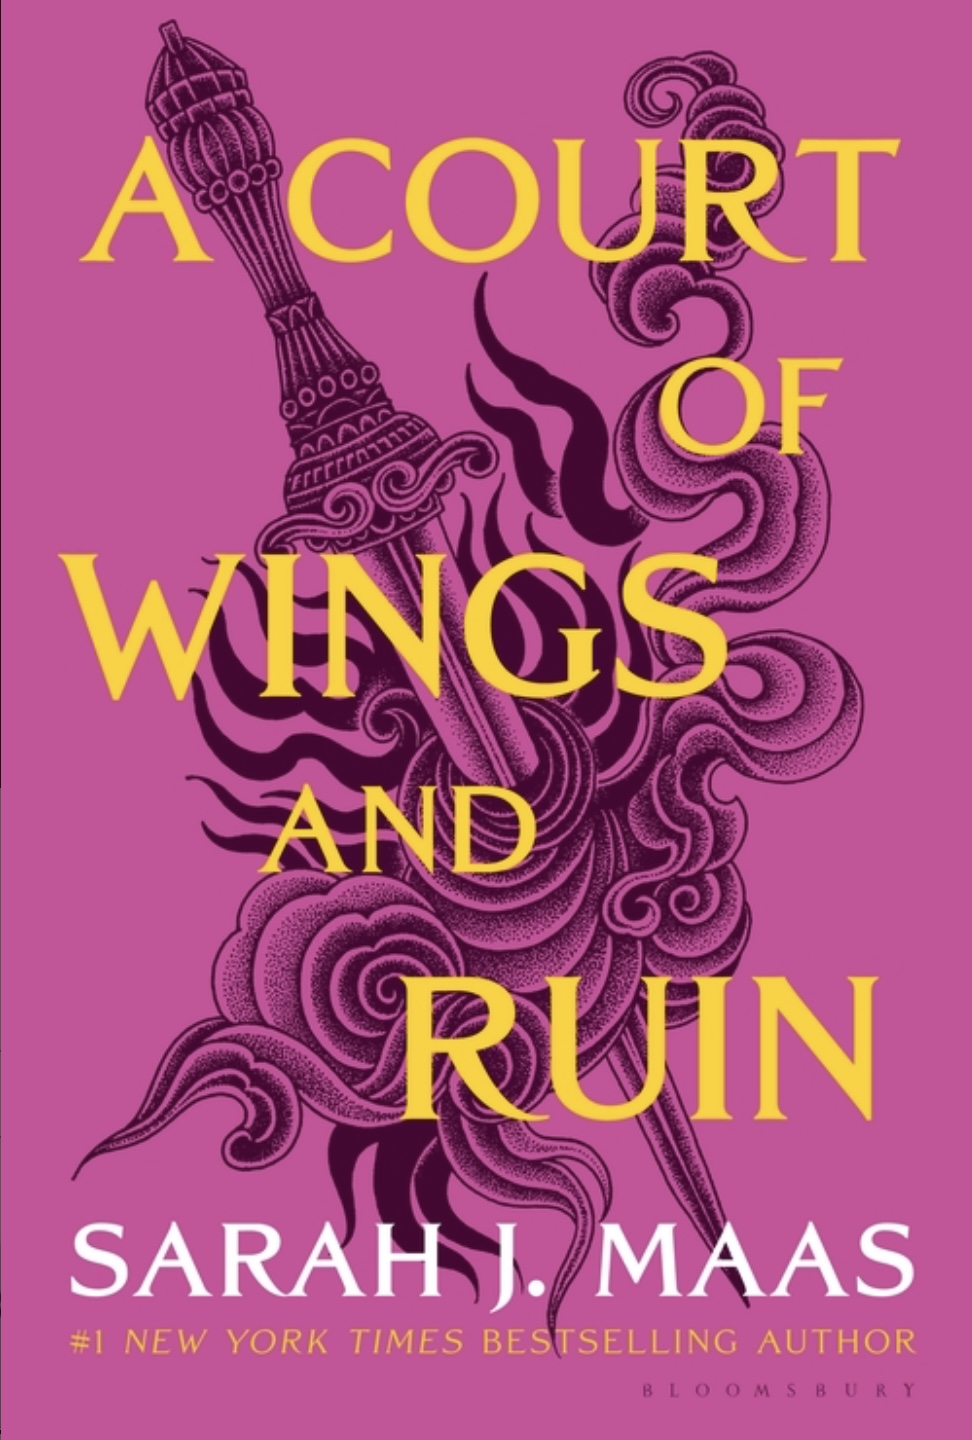 A Court of Wings and Ruin (ACOWAR)